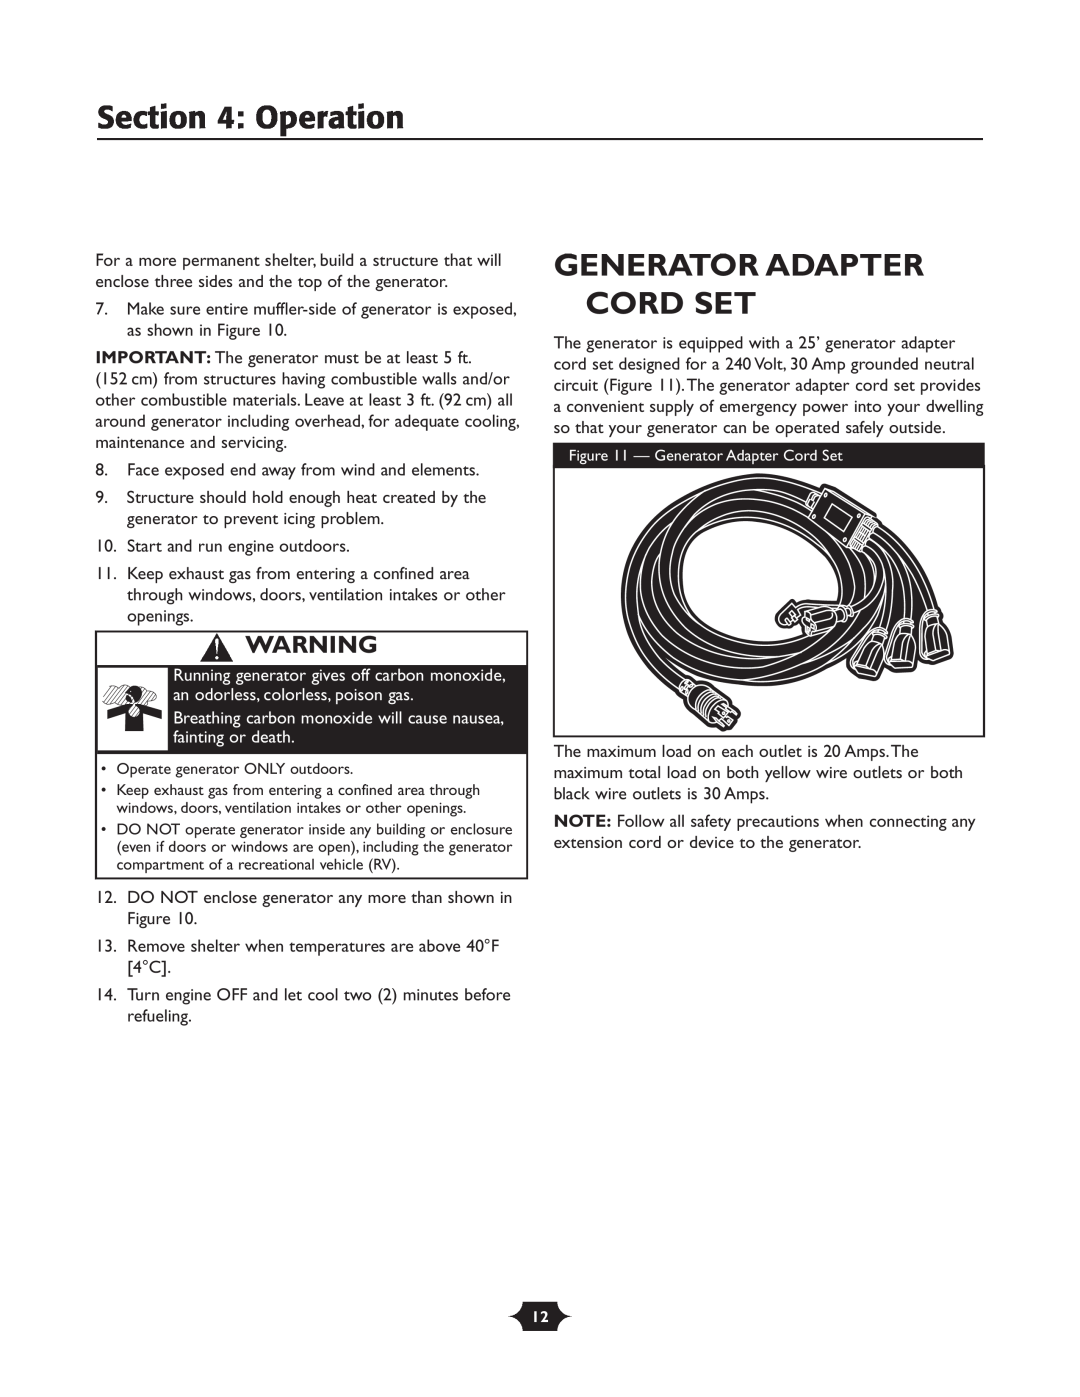 Briggs & Stratton 30237 owner manual Generator Adapter, Cord Set, Operation 